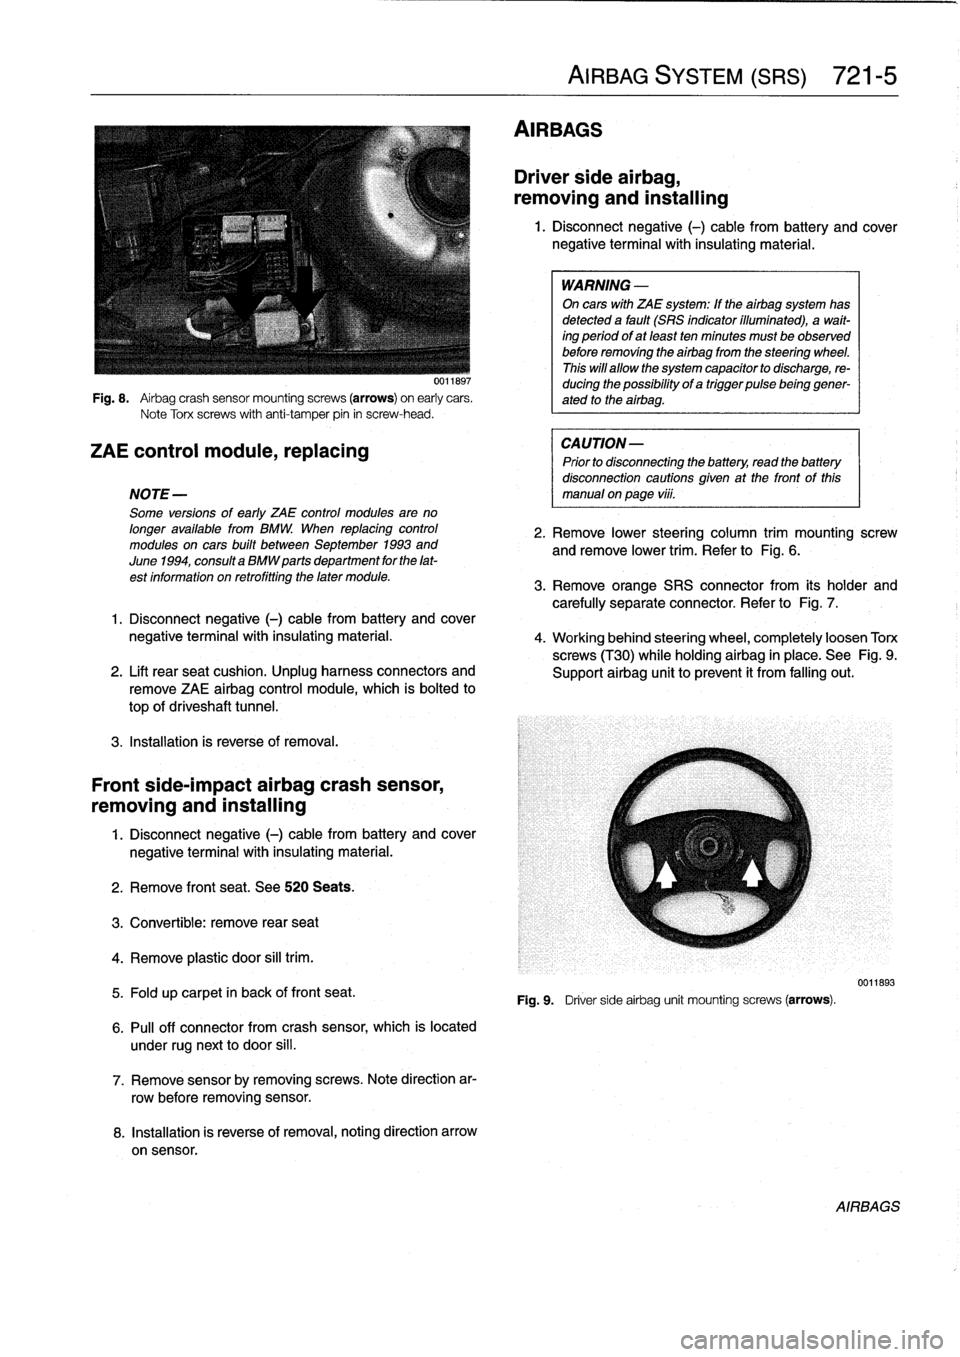 BMW 318i 1997 E36 Workshop Manual 
Fig
.
8
.

	

Airbag
crash
sensor
mountingscrews
(arrows)
on
early
cars
.
Note
Torx
screws
with
anti-tamper
pin
in
screw-head
.

ZAE
control
module,
replacing

NOTE-

Some
versions
of
early
ZAE
contr